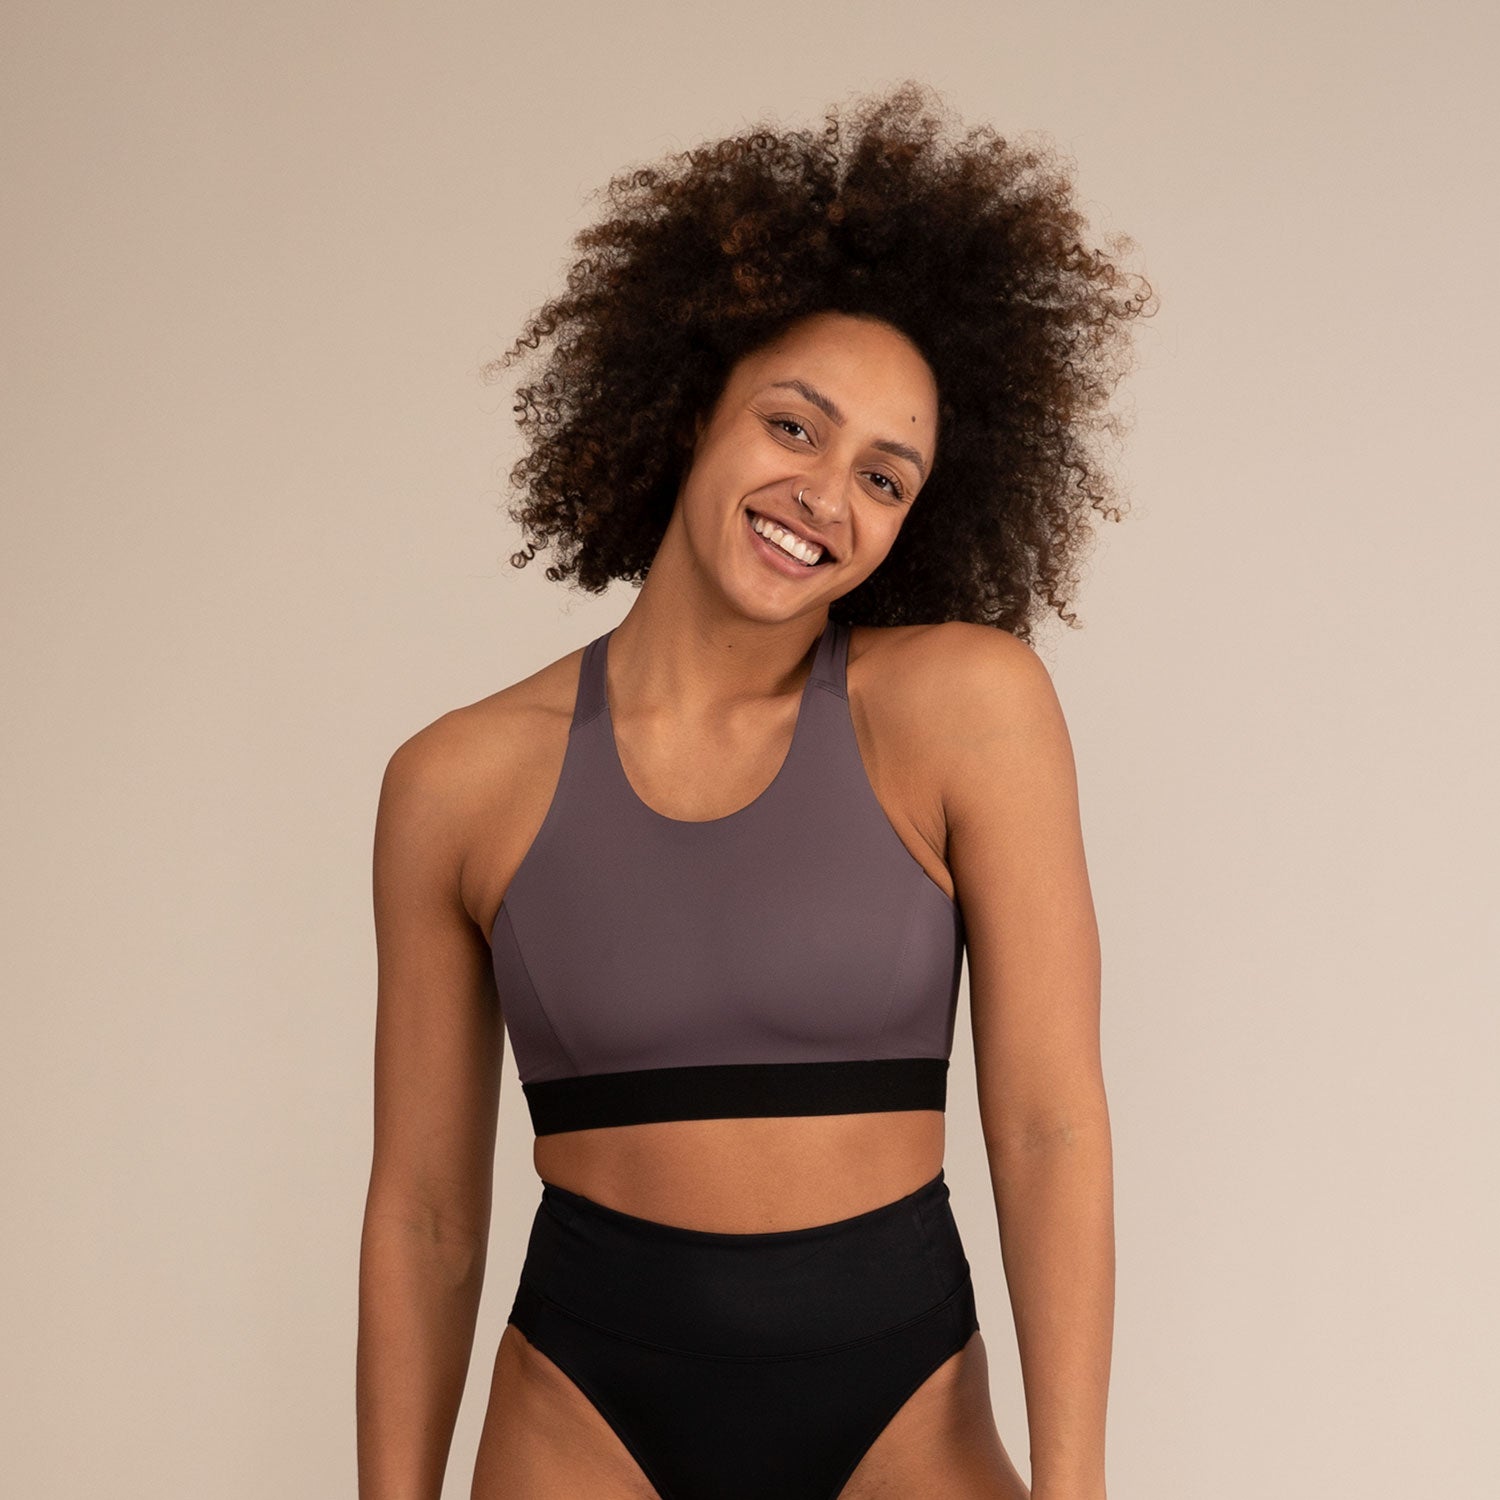 EQUINOX MINIMAL LEOPARD | Reversible Recycled Sports Bra | 3RD ROCK Clothing -  Kendal is a 34D with a 32" underbust, 36" overbust and wears a size 12 F